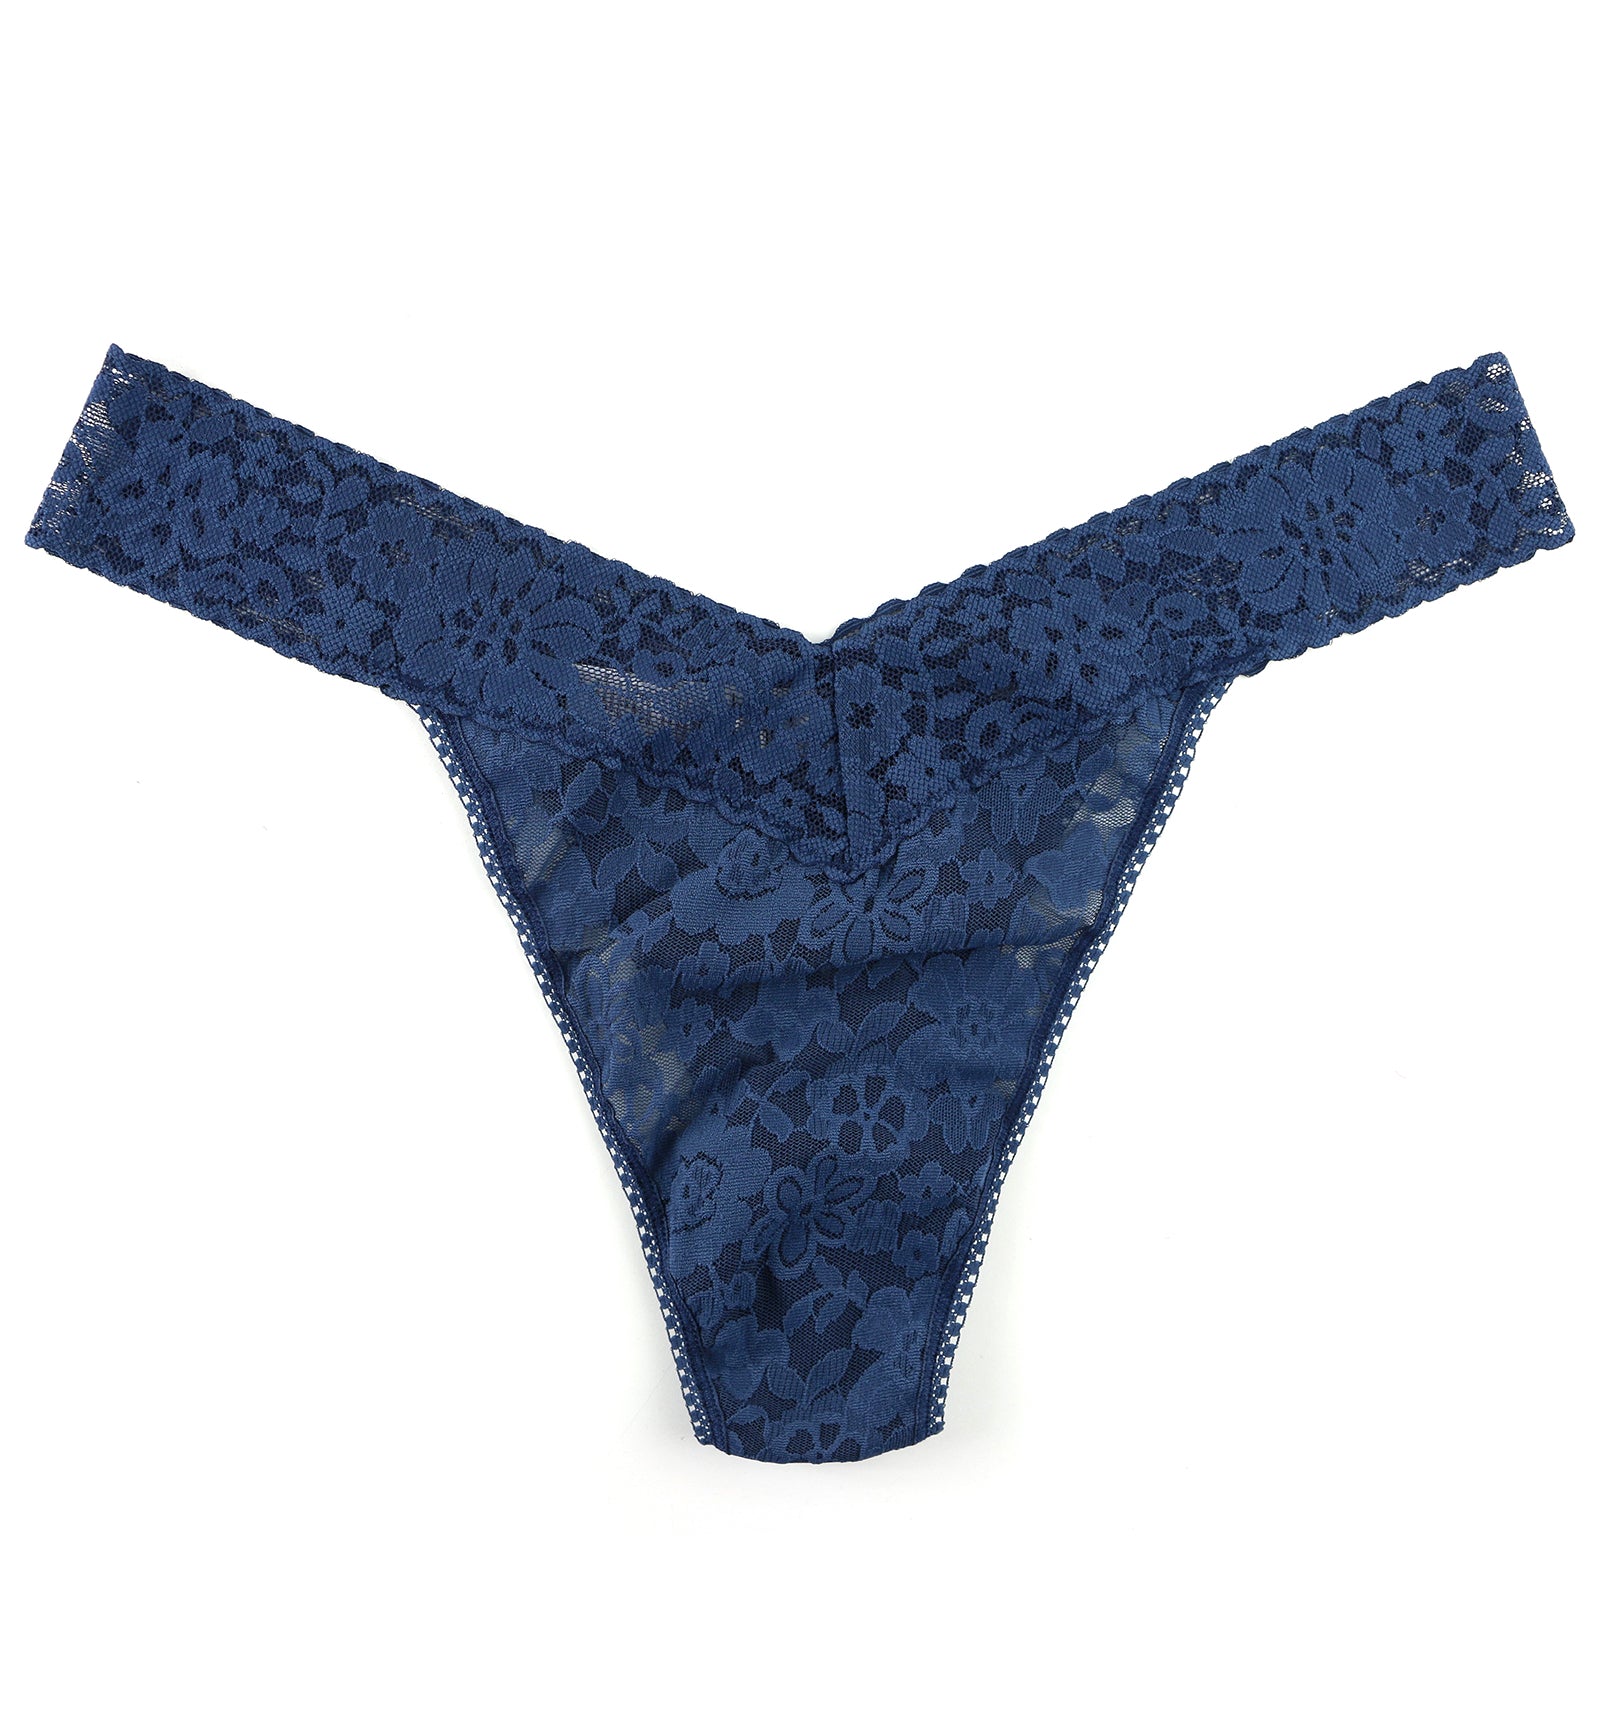 Hanky Panky Daily Lace Original Rise Thong PLUS (771101XP),Nightshade - Nightshade,One Size